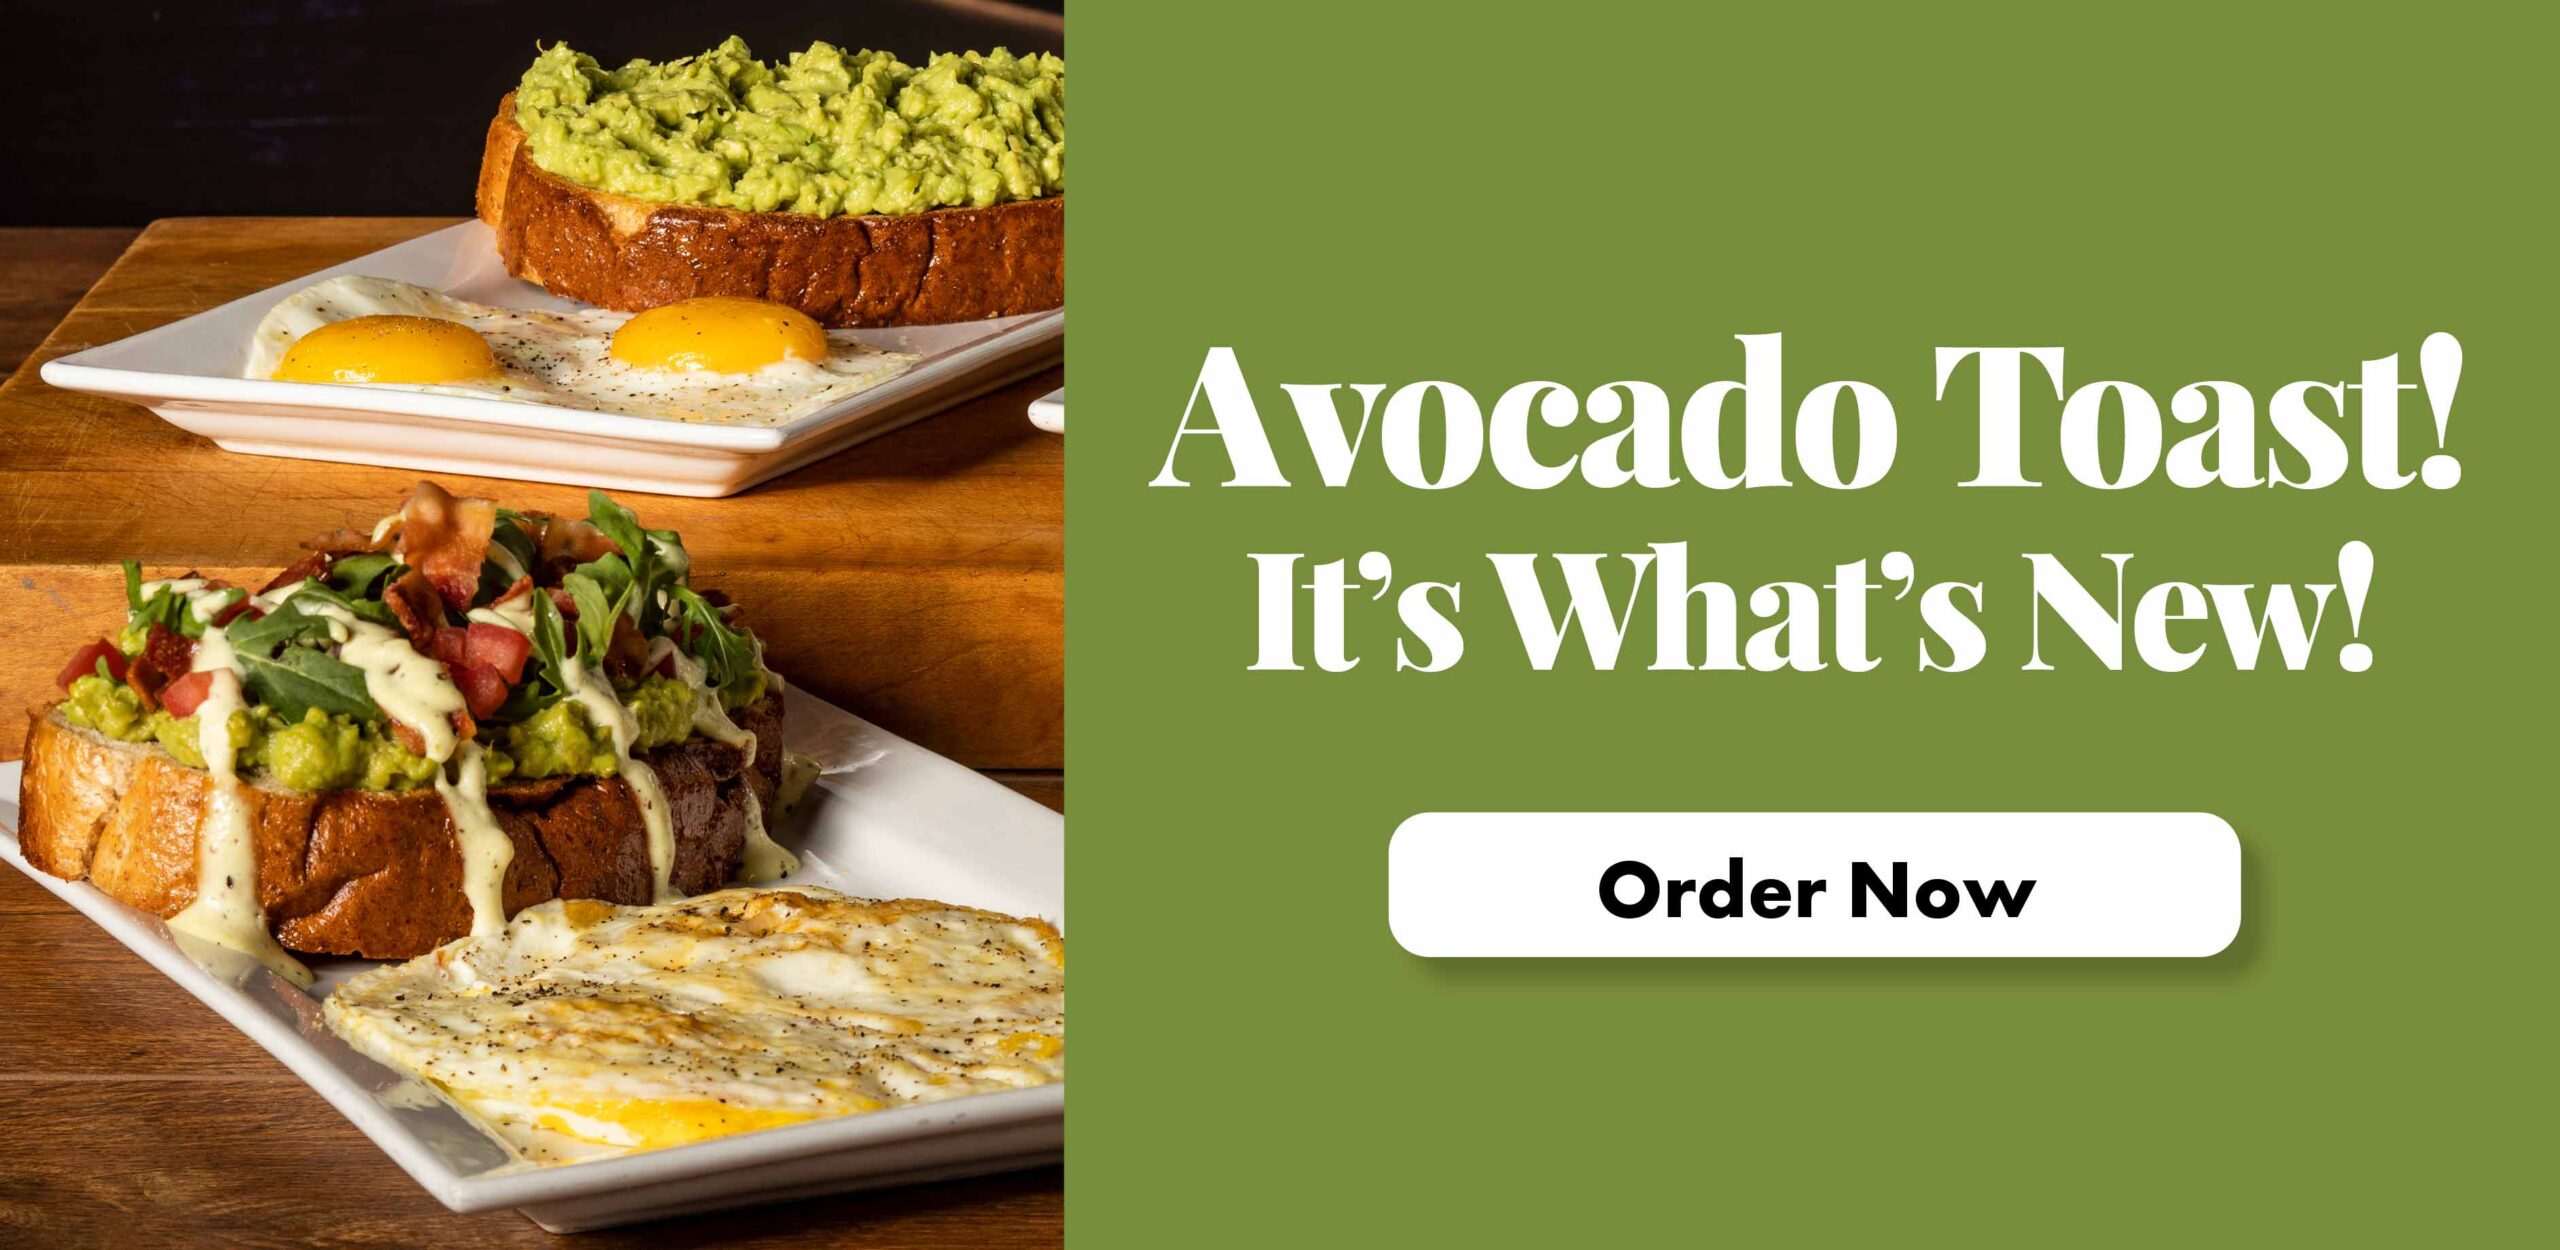 Avocado toast! It's what's new! Click for details